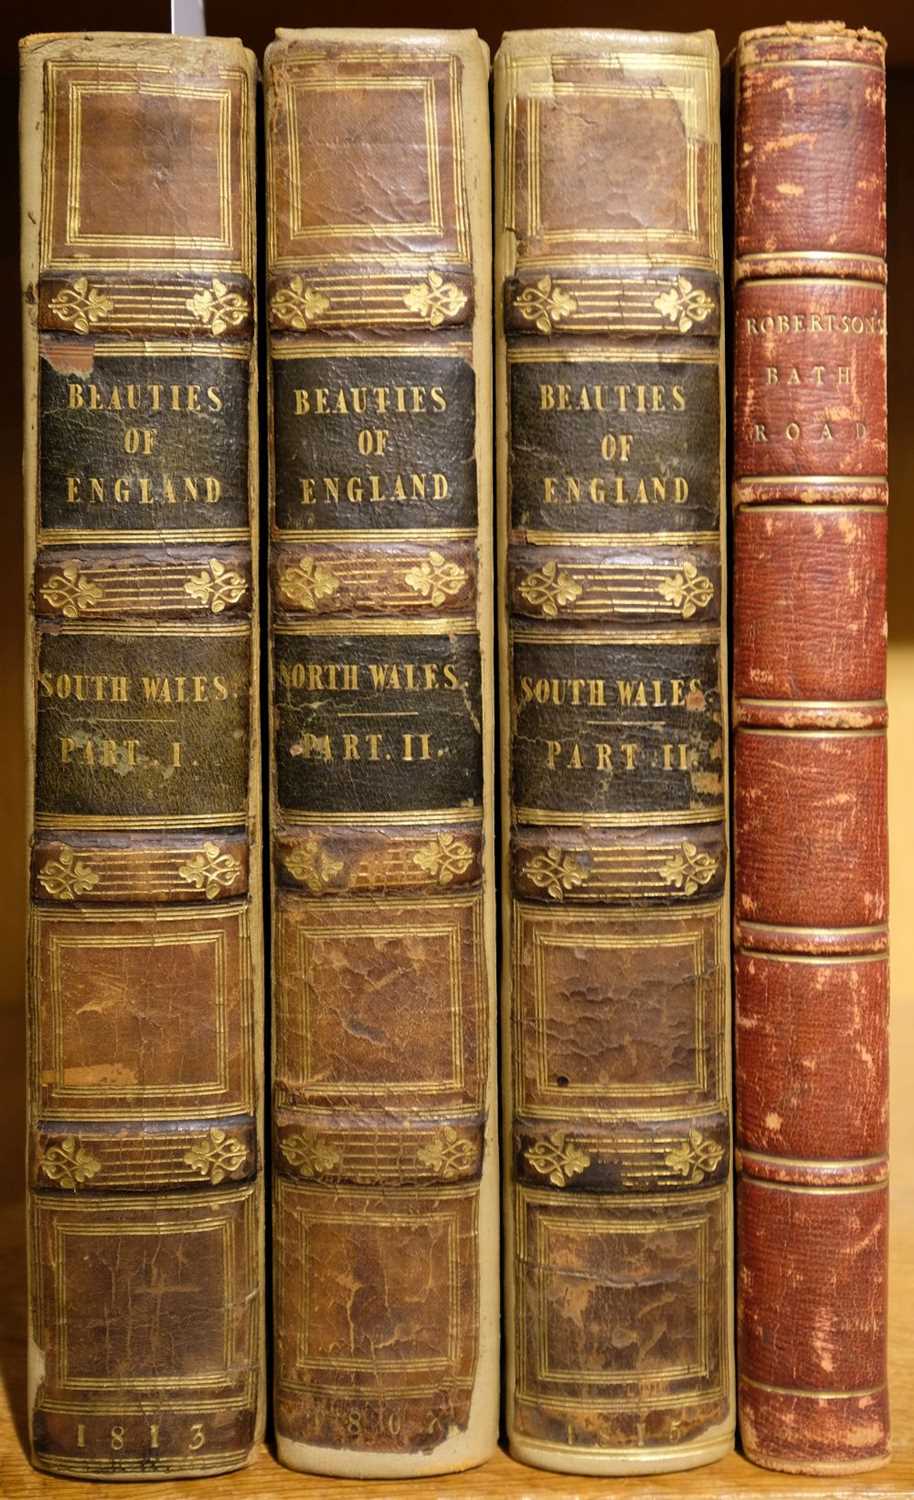 Lot 40 - Rees (Thomas). The Beauties of England and Wales ... South Wales, 1815